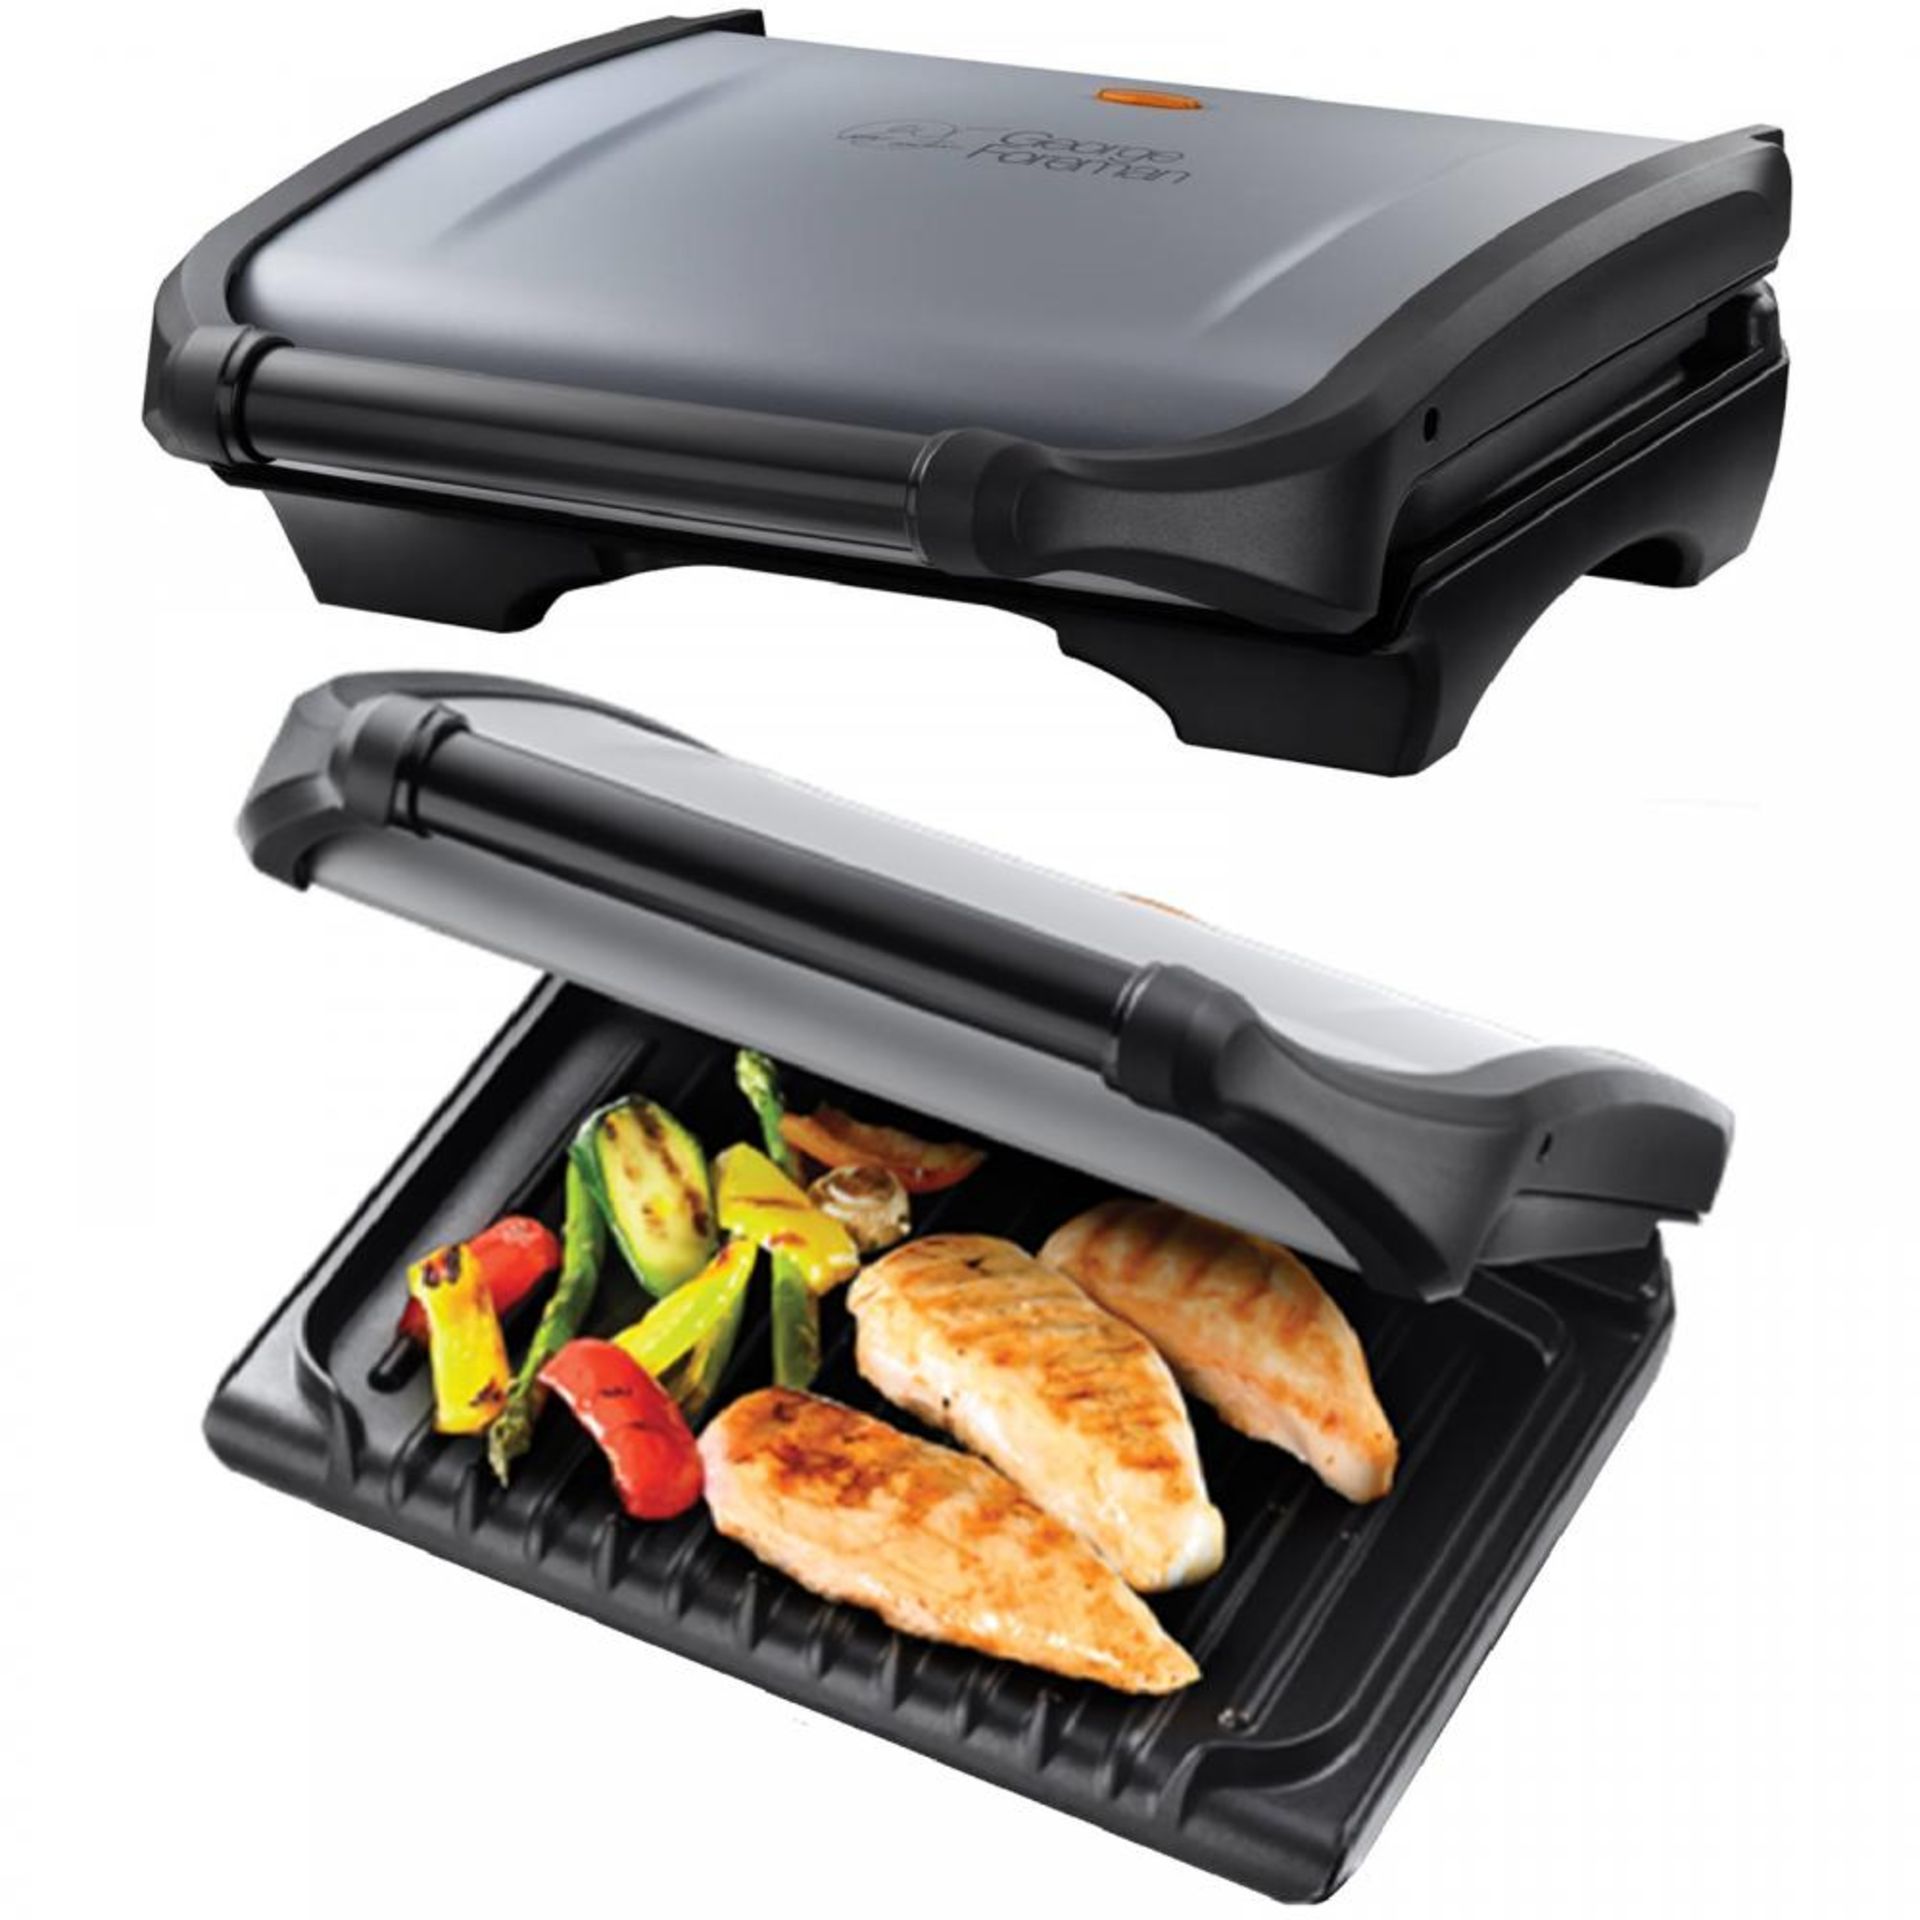 V Brand New George Forman Five Portion Fat Reducing Grill ISP £30 (The Original Factory Shop) X 2